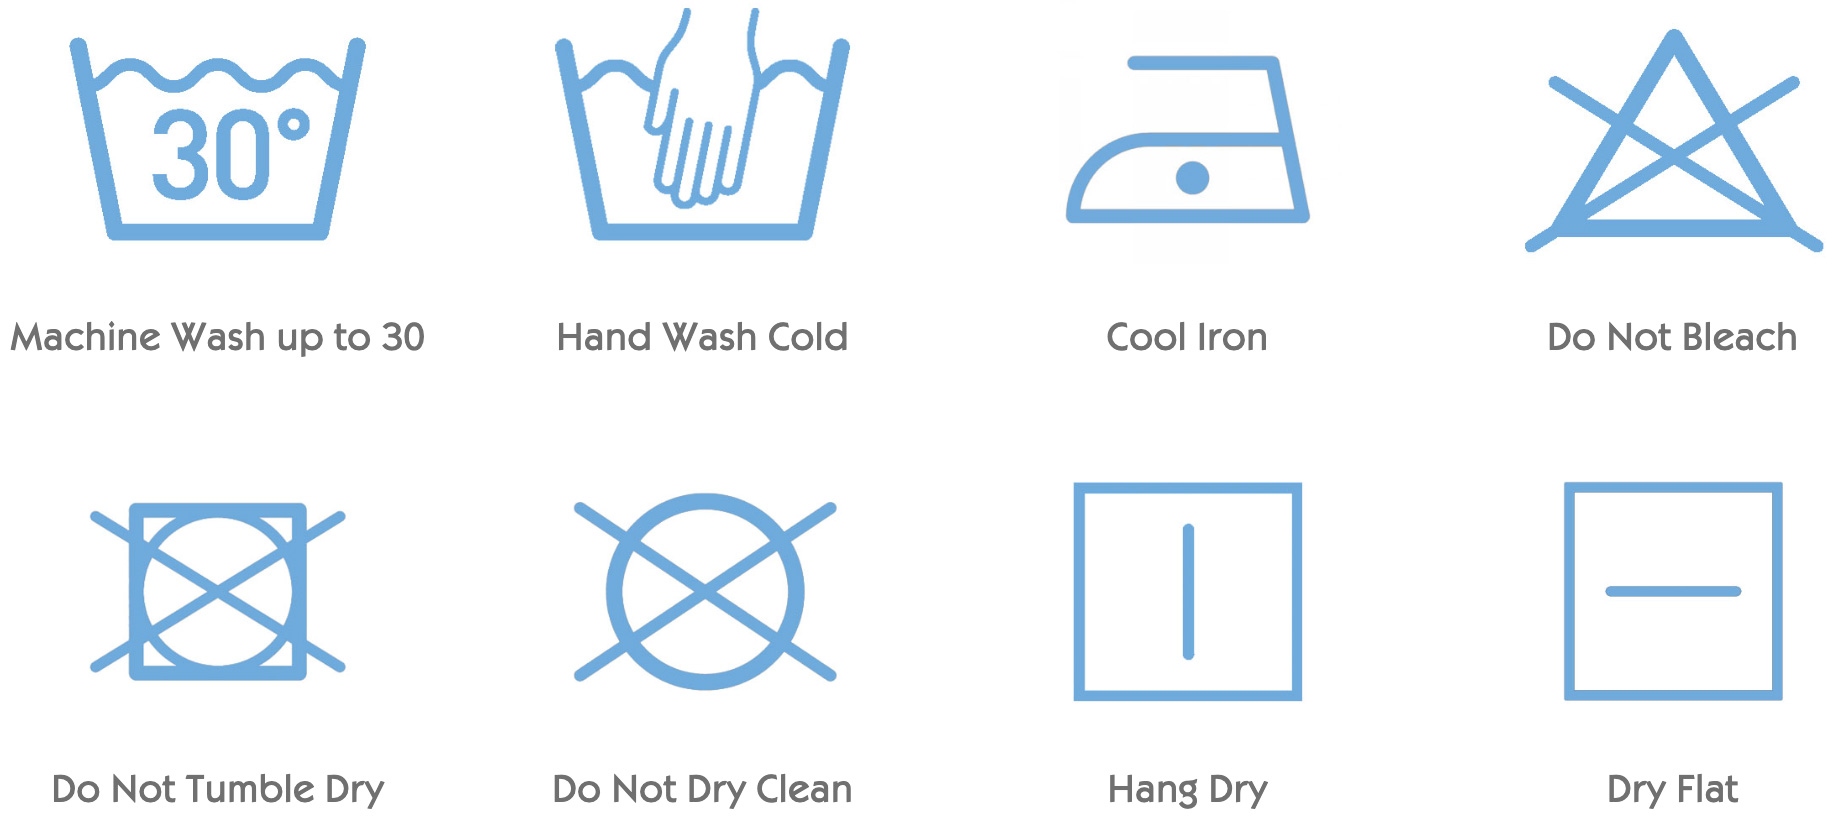 machine wash up to 30 degrees. Hand wash cold. Cool Iron. Do not bleach. Do not tumble dry. Do not dry clean. Hang dry. Dry Flat.